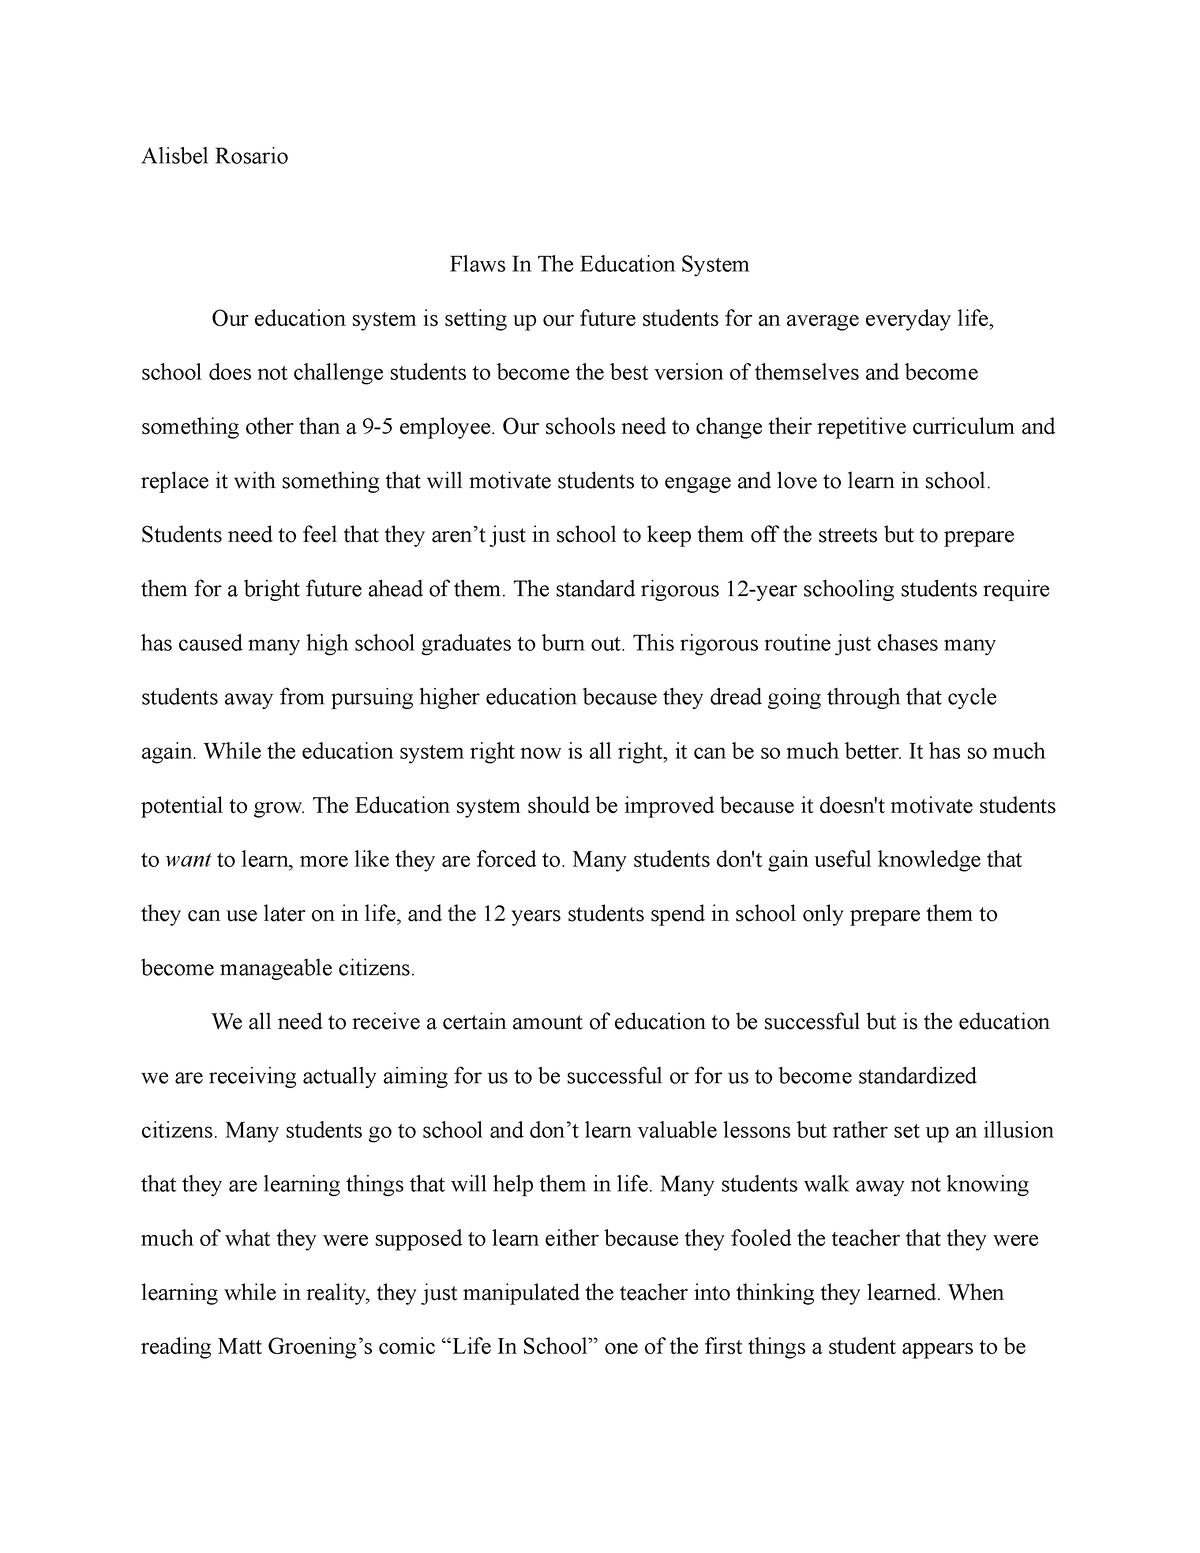 flaws in our education system essay